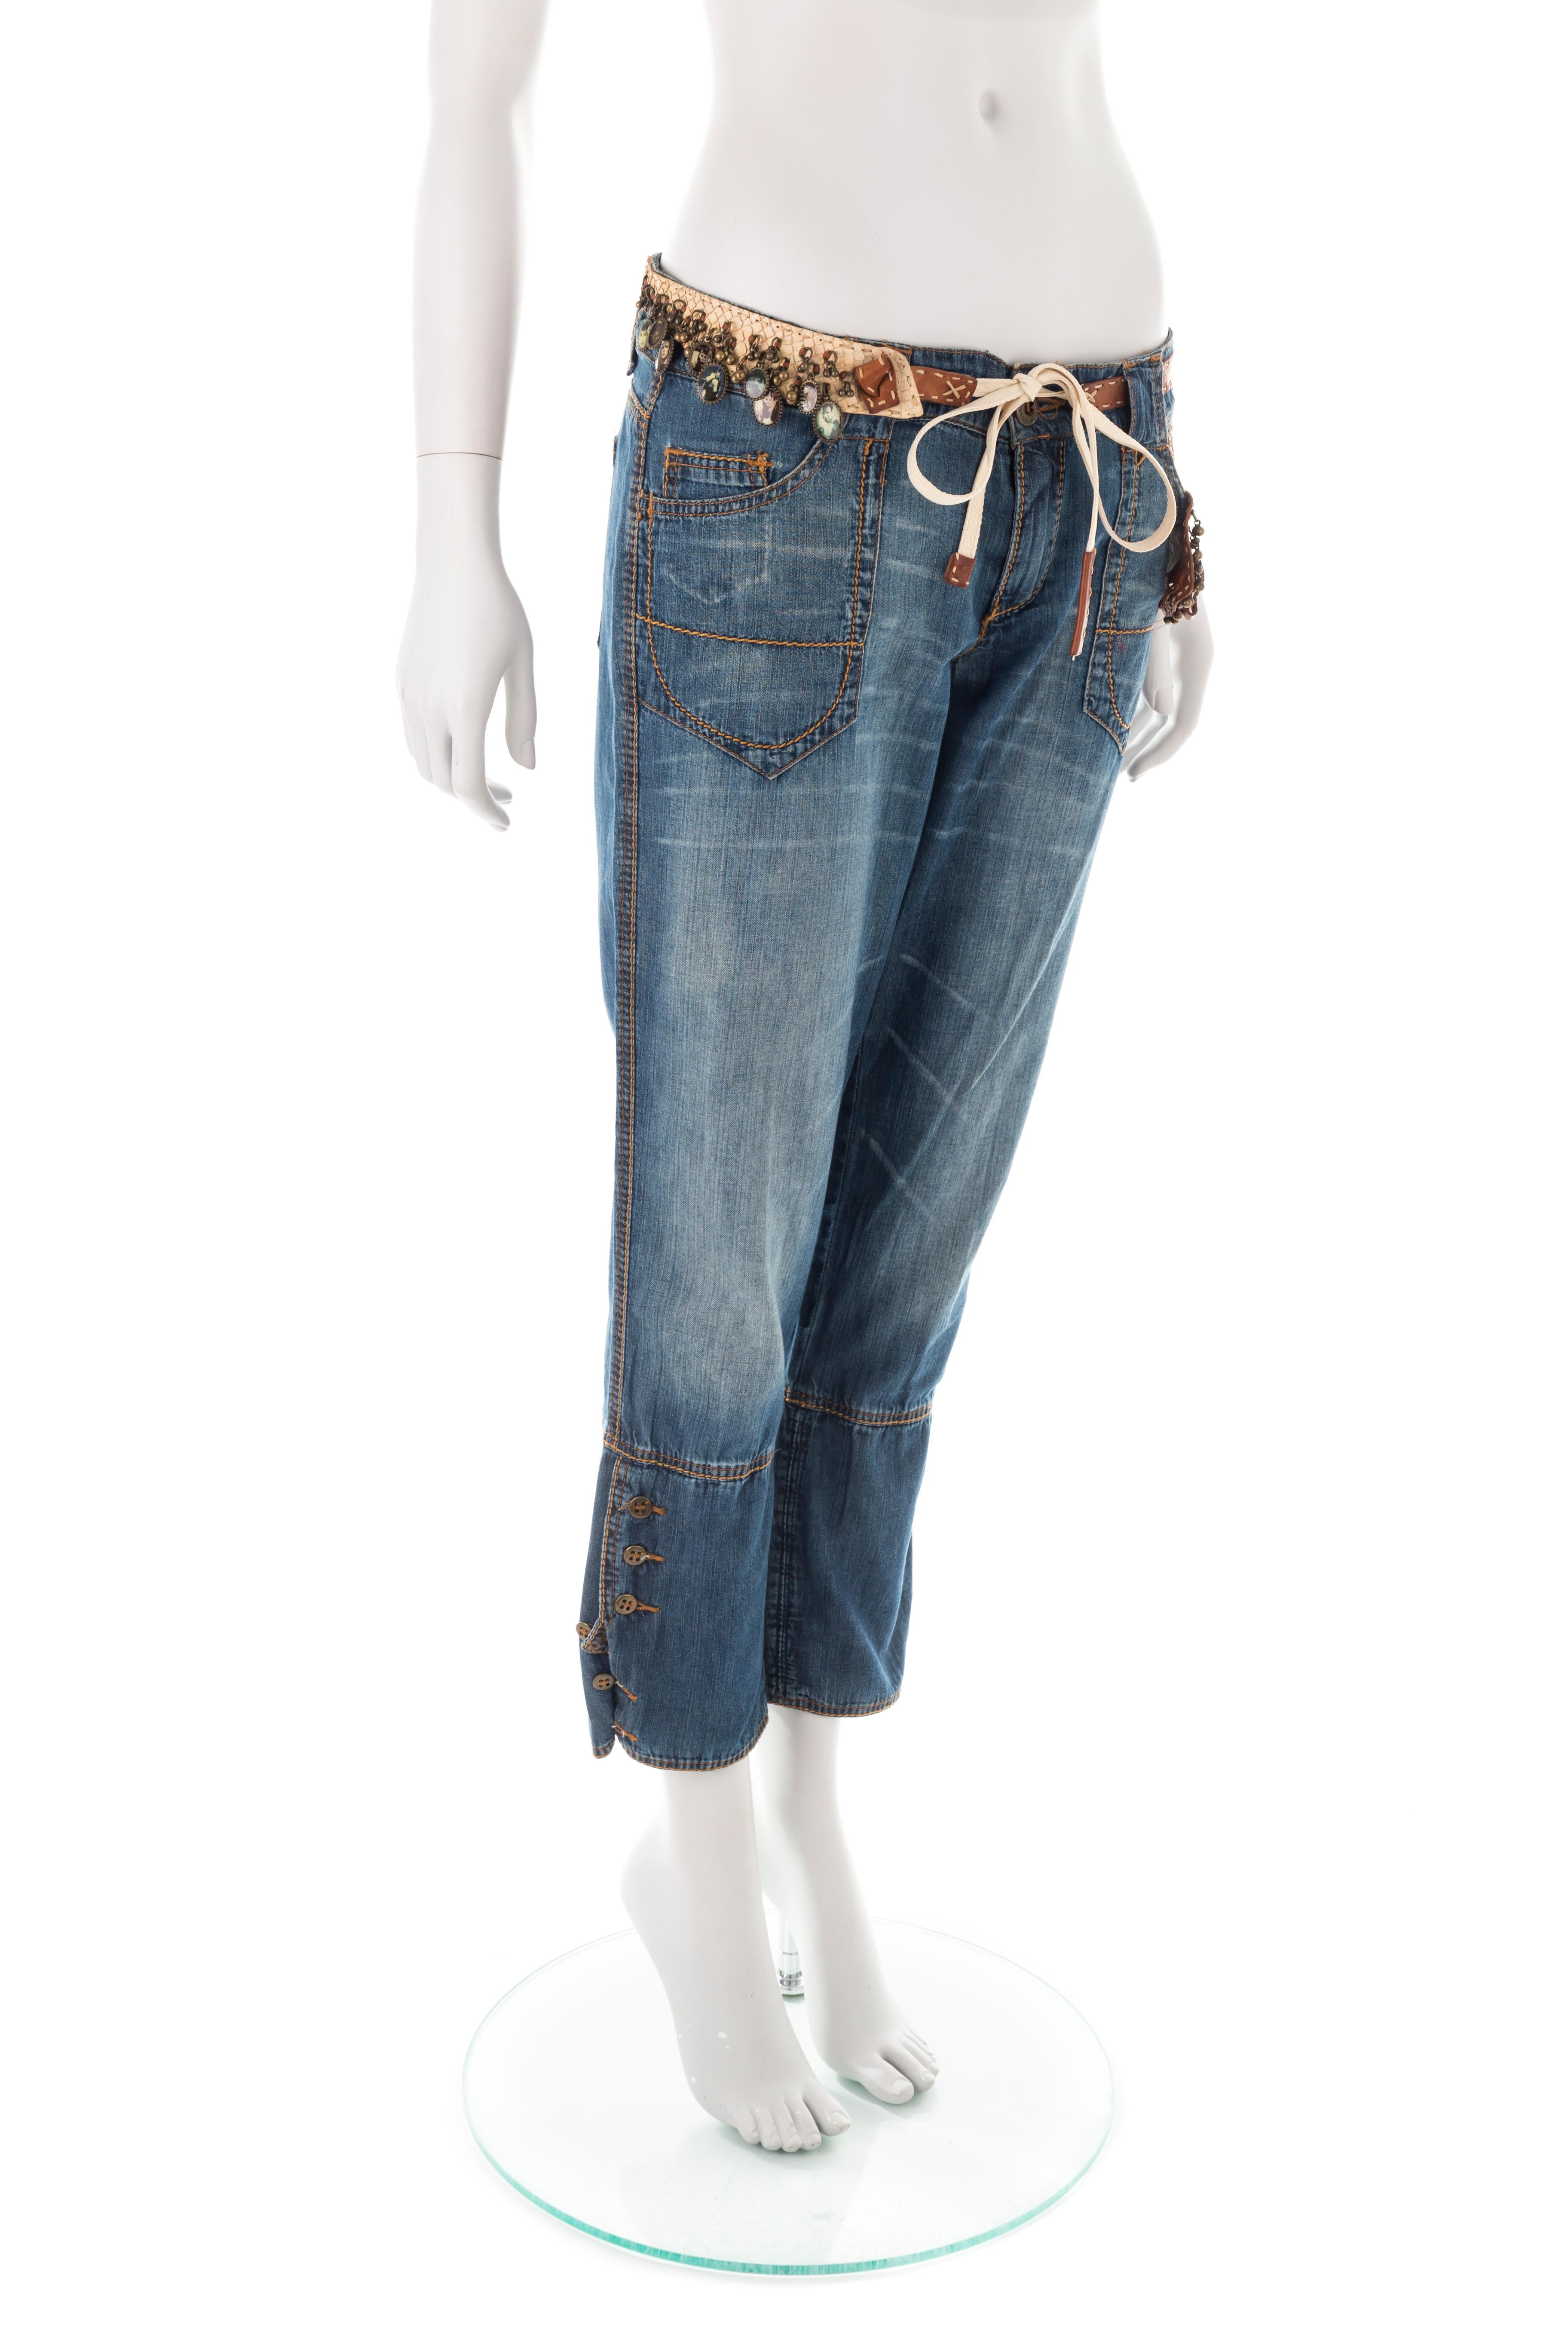 - Ermanno Scervino medium-wash whiskered capri jeans
- Sold by Gold Palms Vintage
- Spring/Summer 2005
- Cream cloth drawstring
- Python leather patches 
- Audrey Hepburn belt charms
- Button-up cuffs
- Size IT 44
- The garment has been pinned on